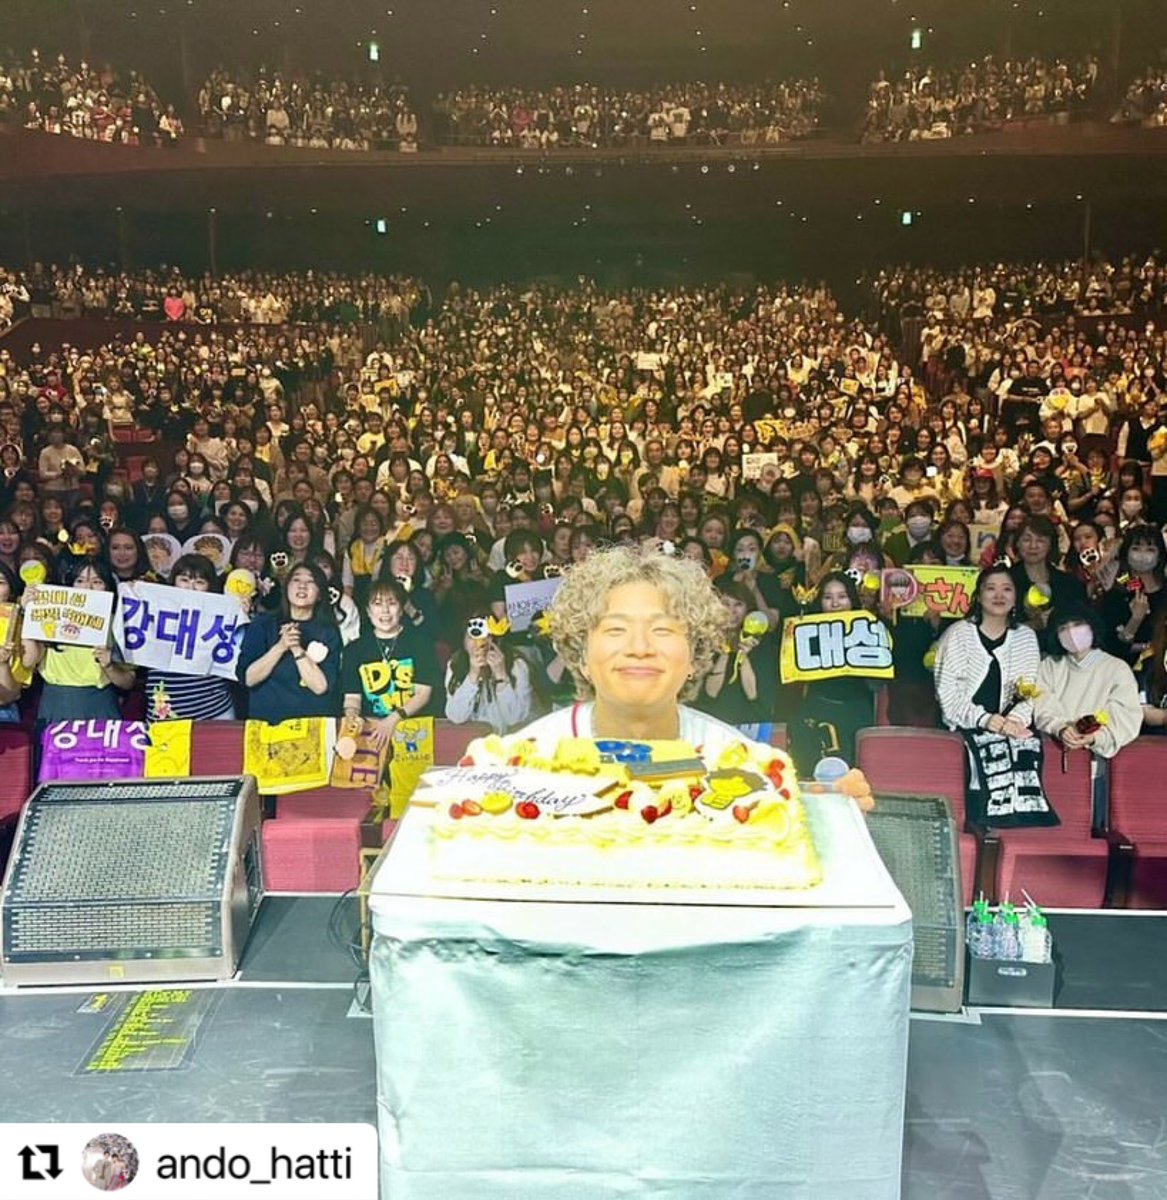 D’s IS ME in Sapporo 🐯💛 ©️ando_hatti Instagram Post THIS IS DAESUNG #DLITEinSapporo #Ds_IS_ME #DAESUNG #DLITE #テソン @d_lable